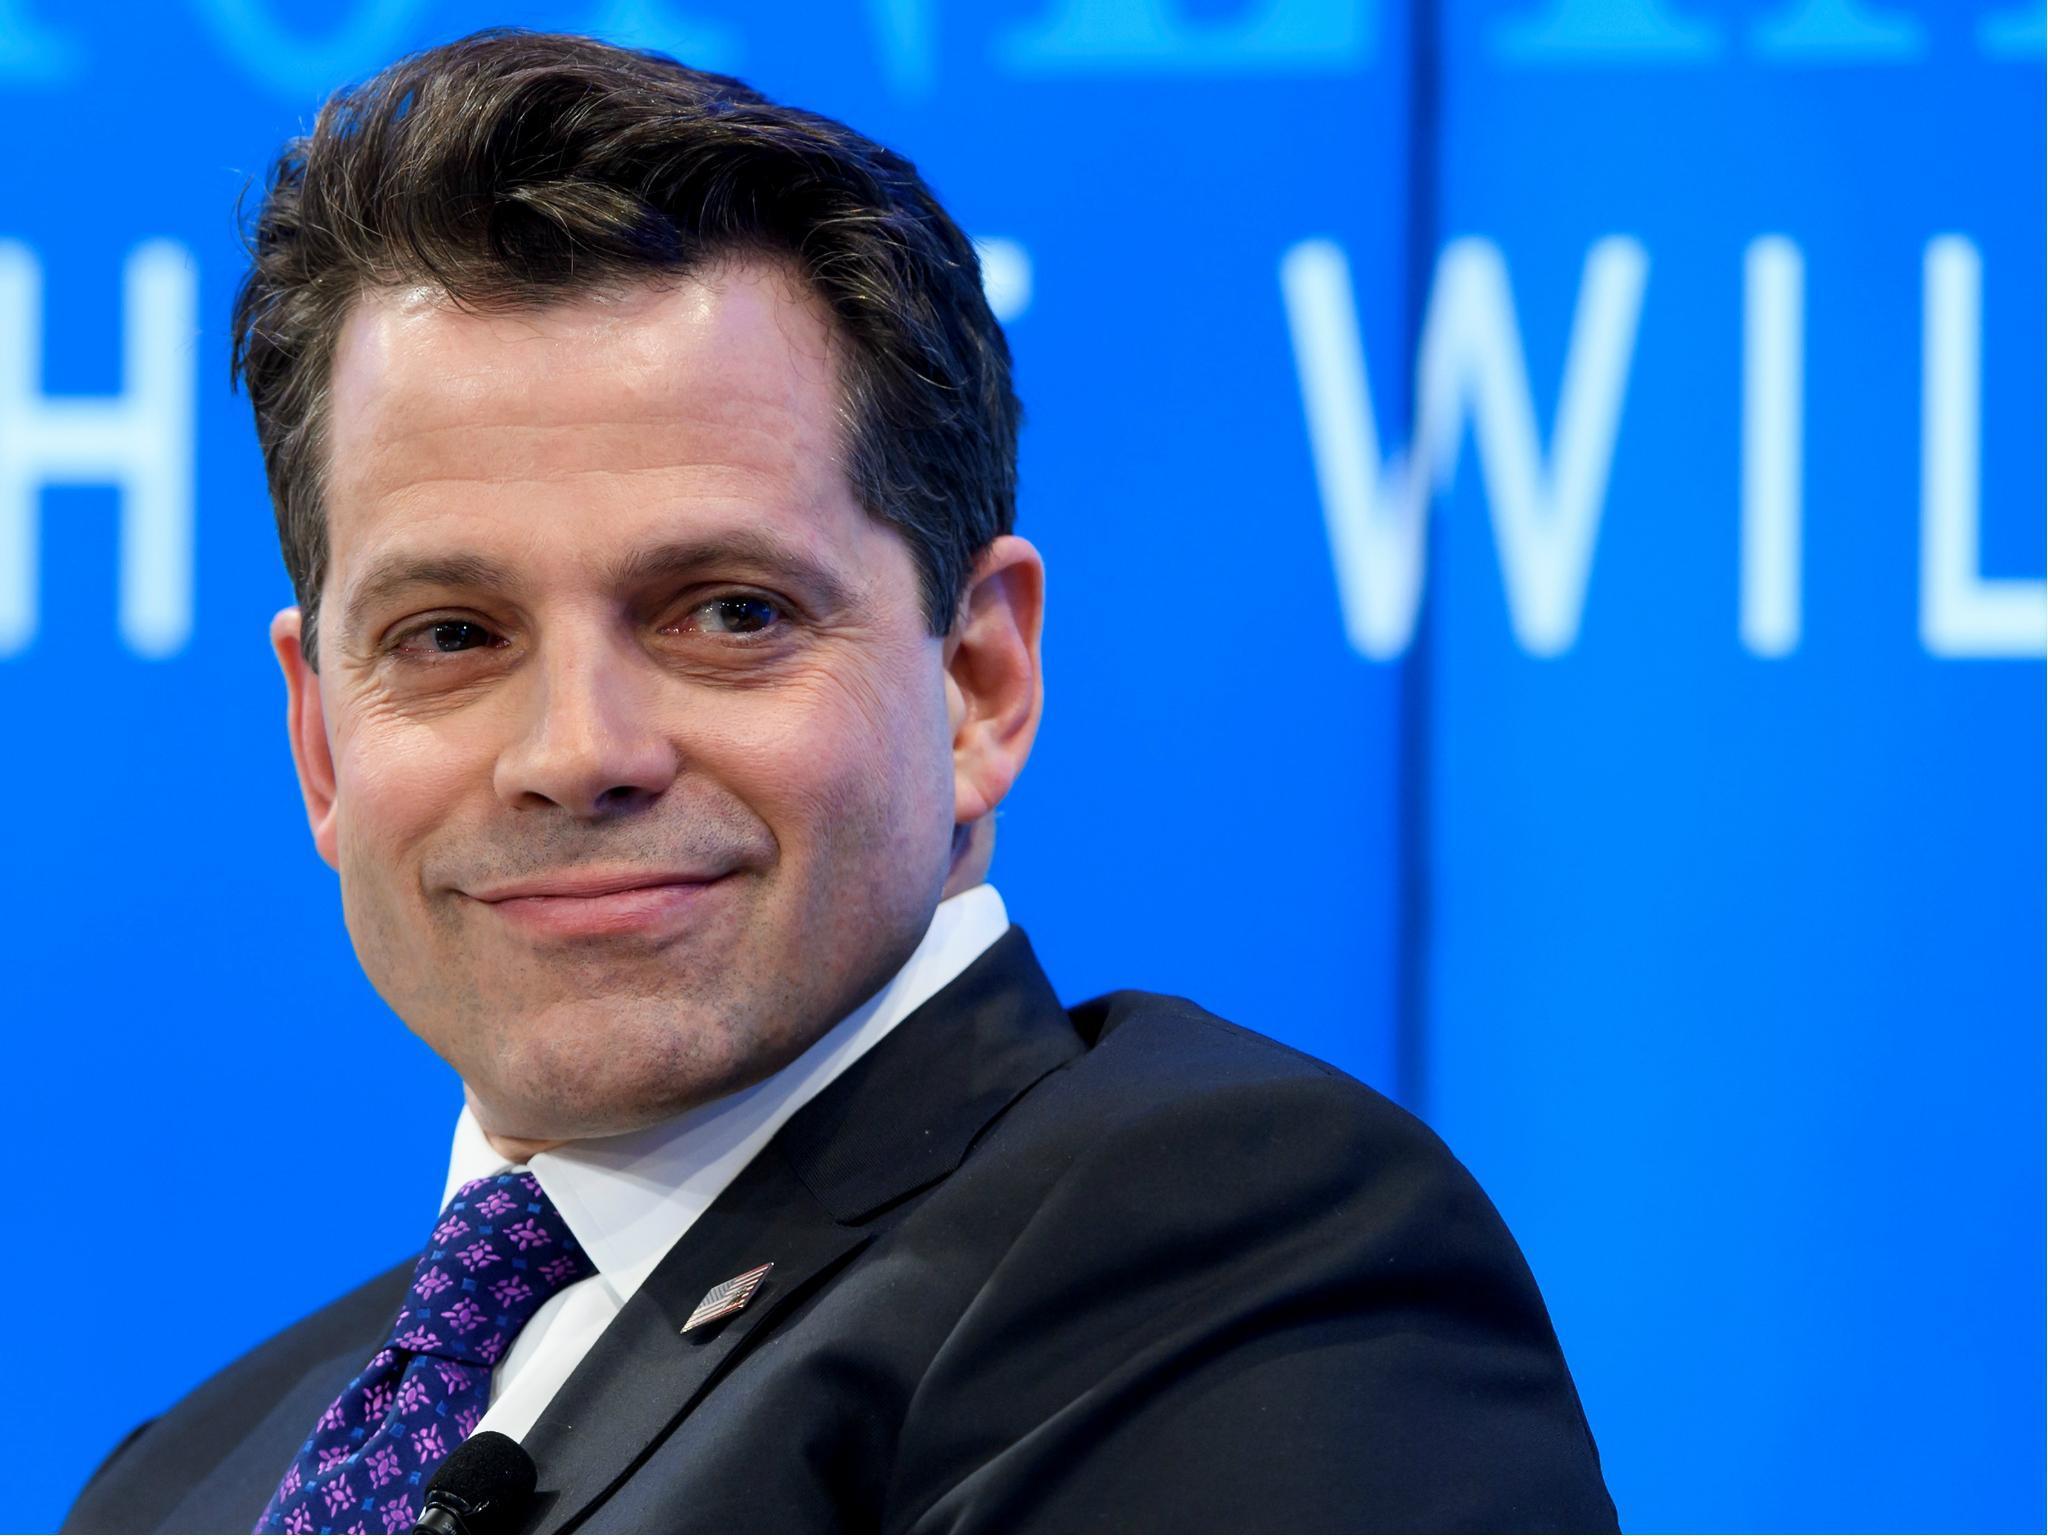 Scaramucci didn't serve in the White House for very long